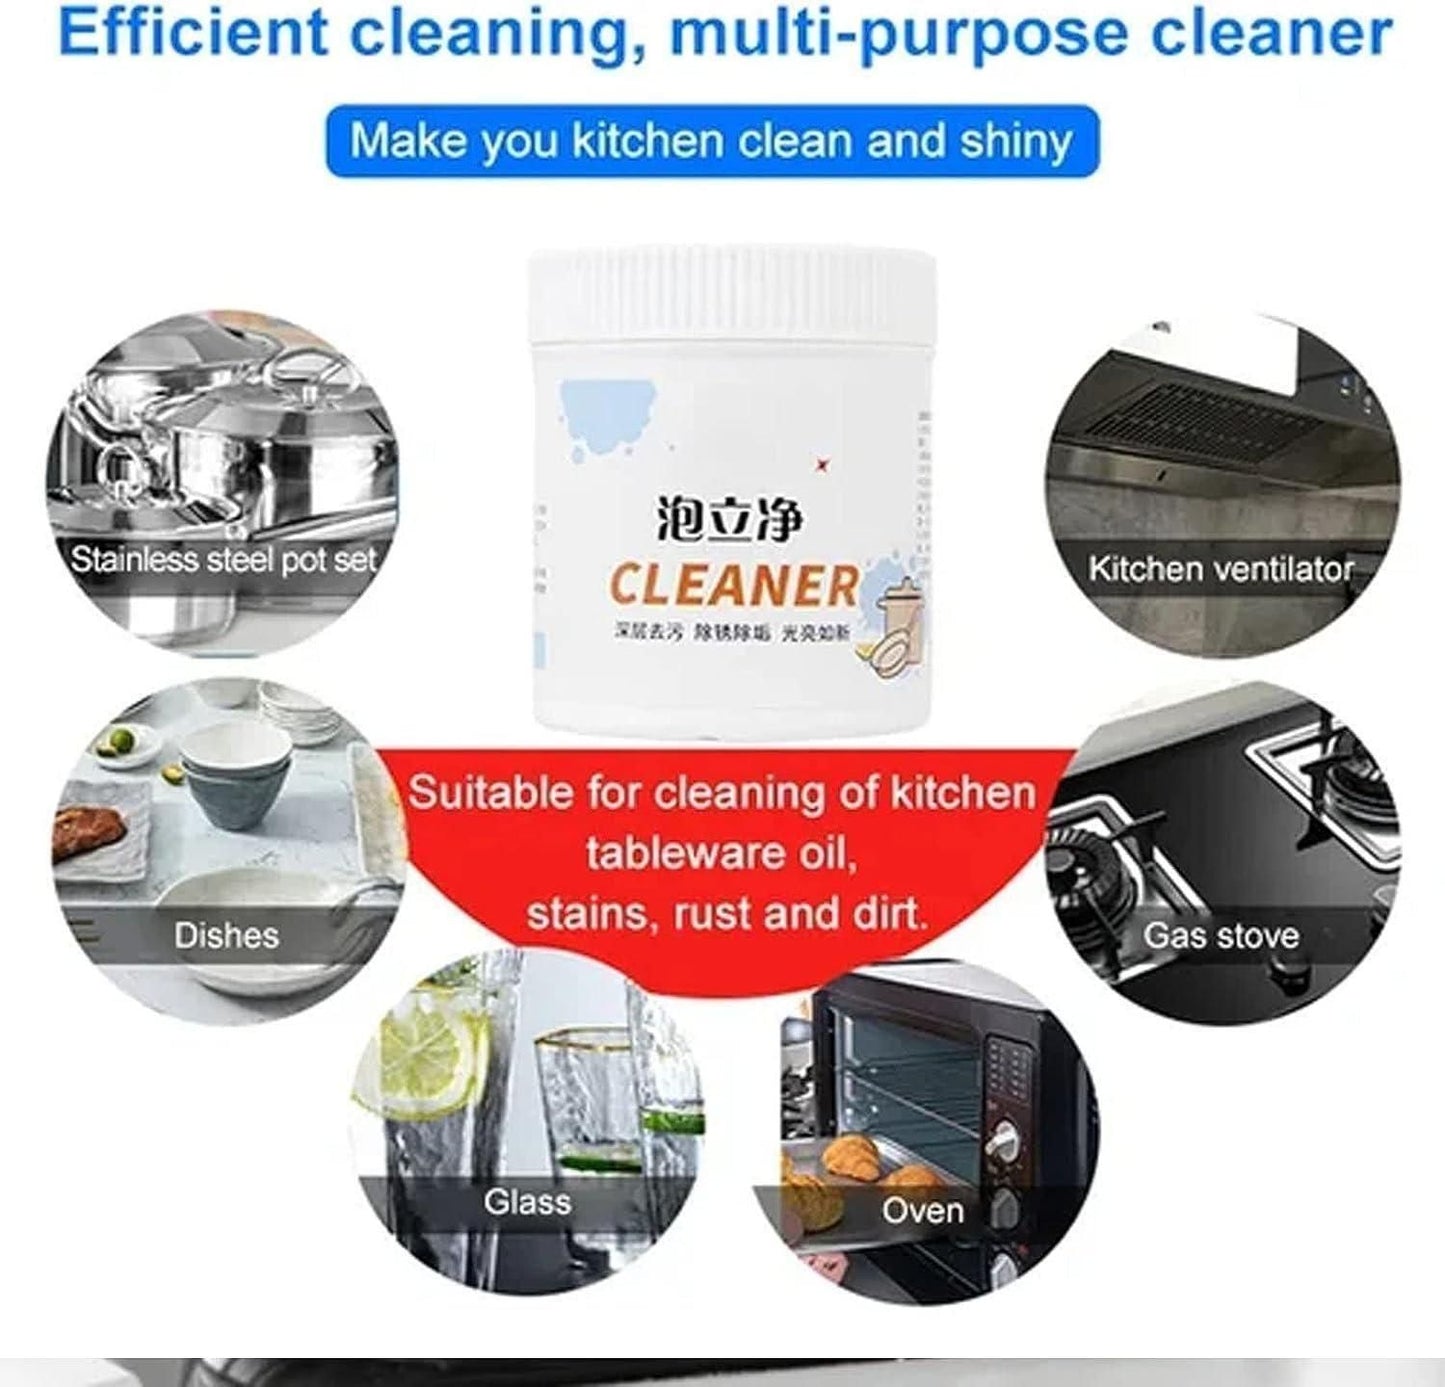 All-Purpose Foam Rust Remover Cleaning Powder for Kitchen (Pack of 1)